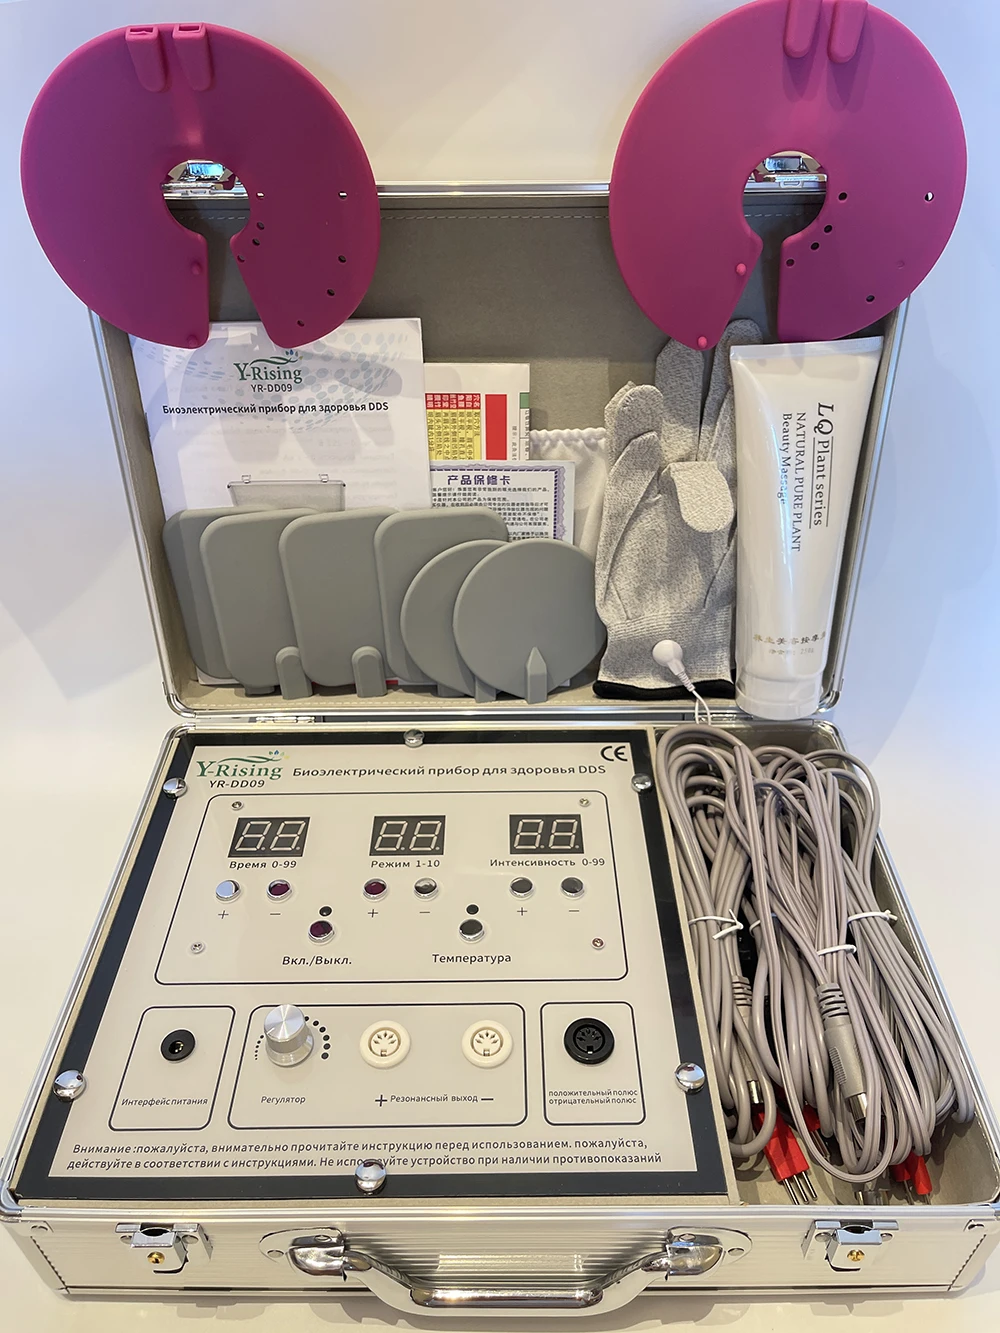 Russian version Physiotherapy Bioelectricity Dds Body Slimming Beauty Equipment